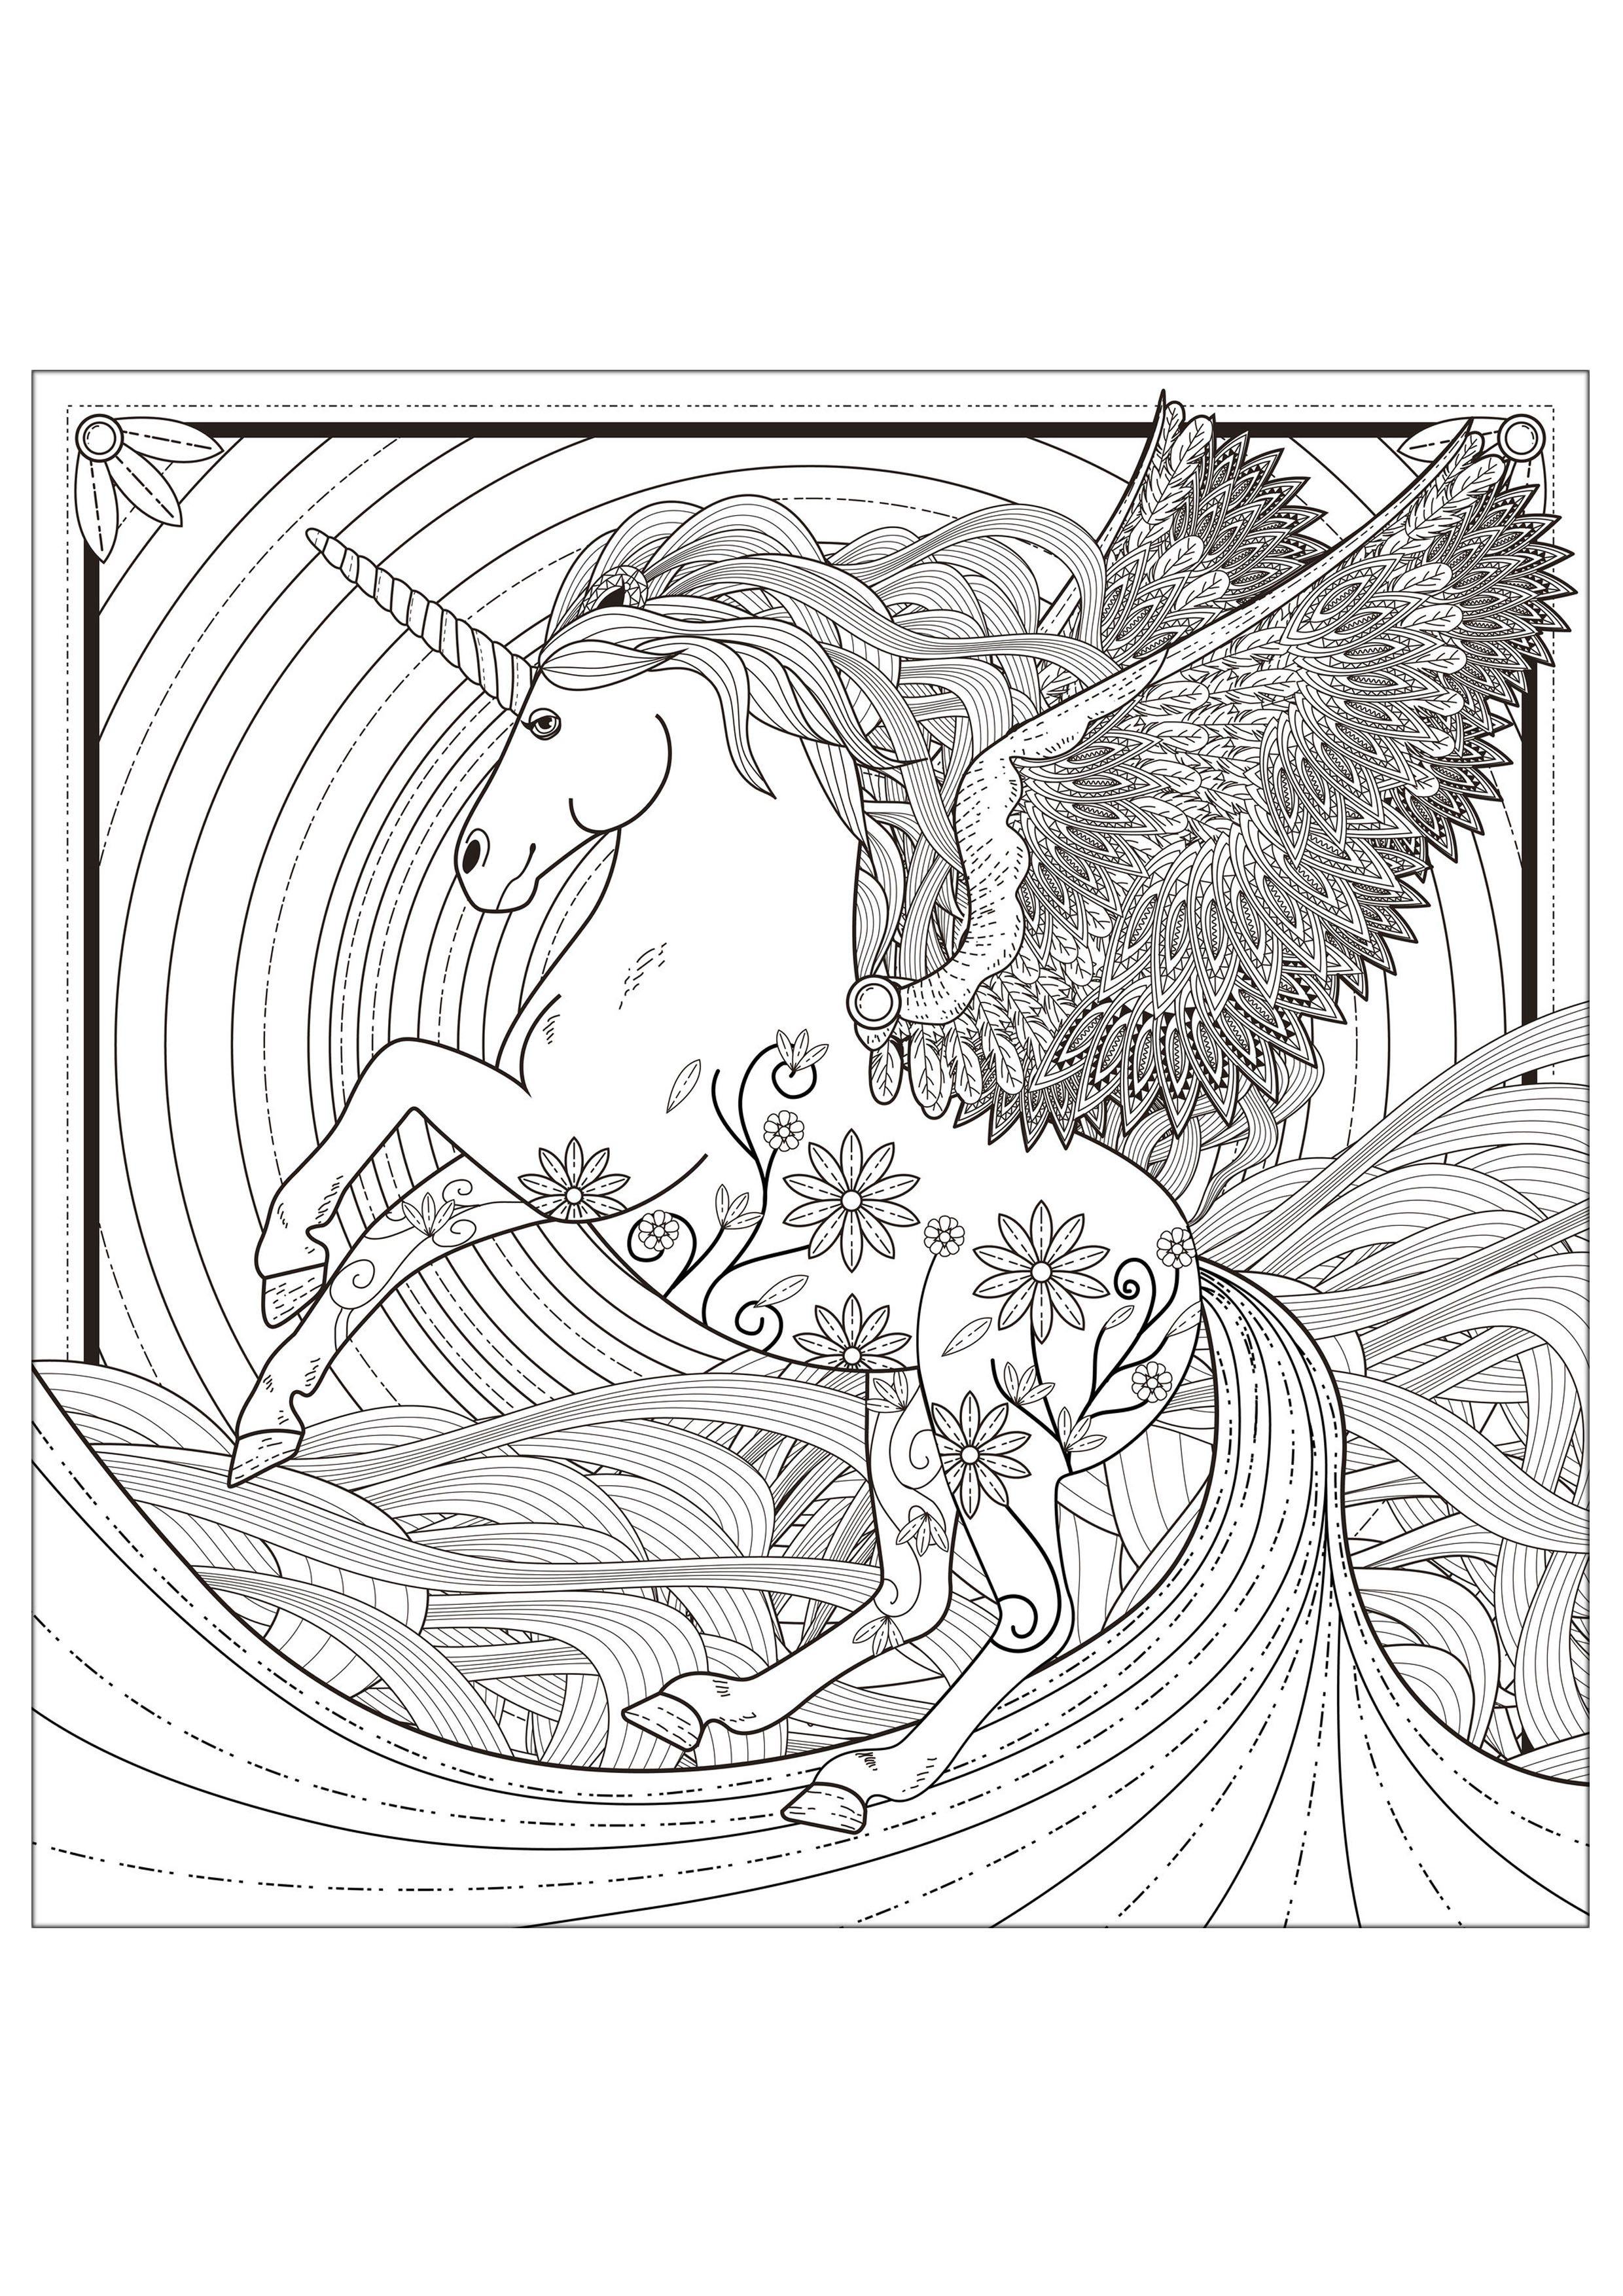 Unicorn Myths Legends Coloring Pages Adults Justcolor Gallery Artist Mythical